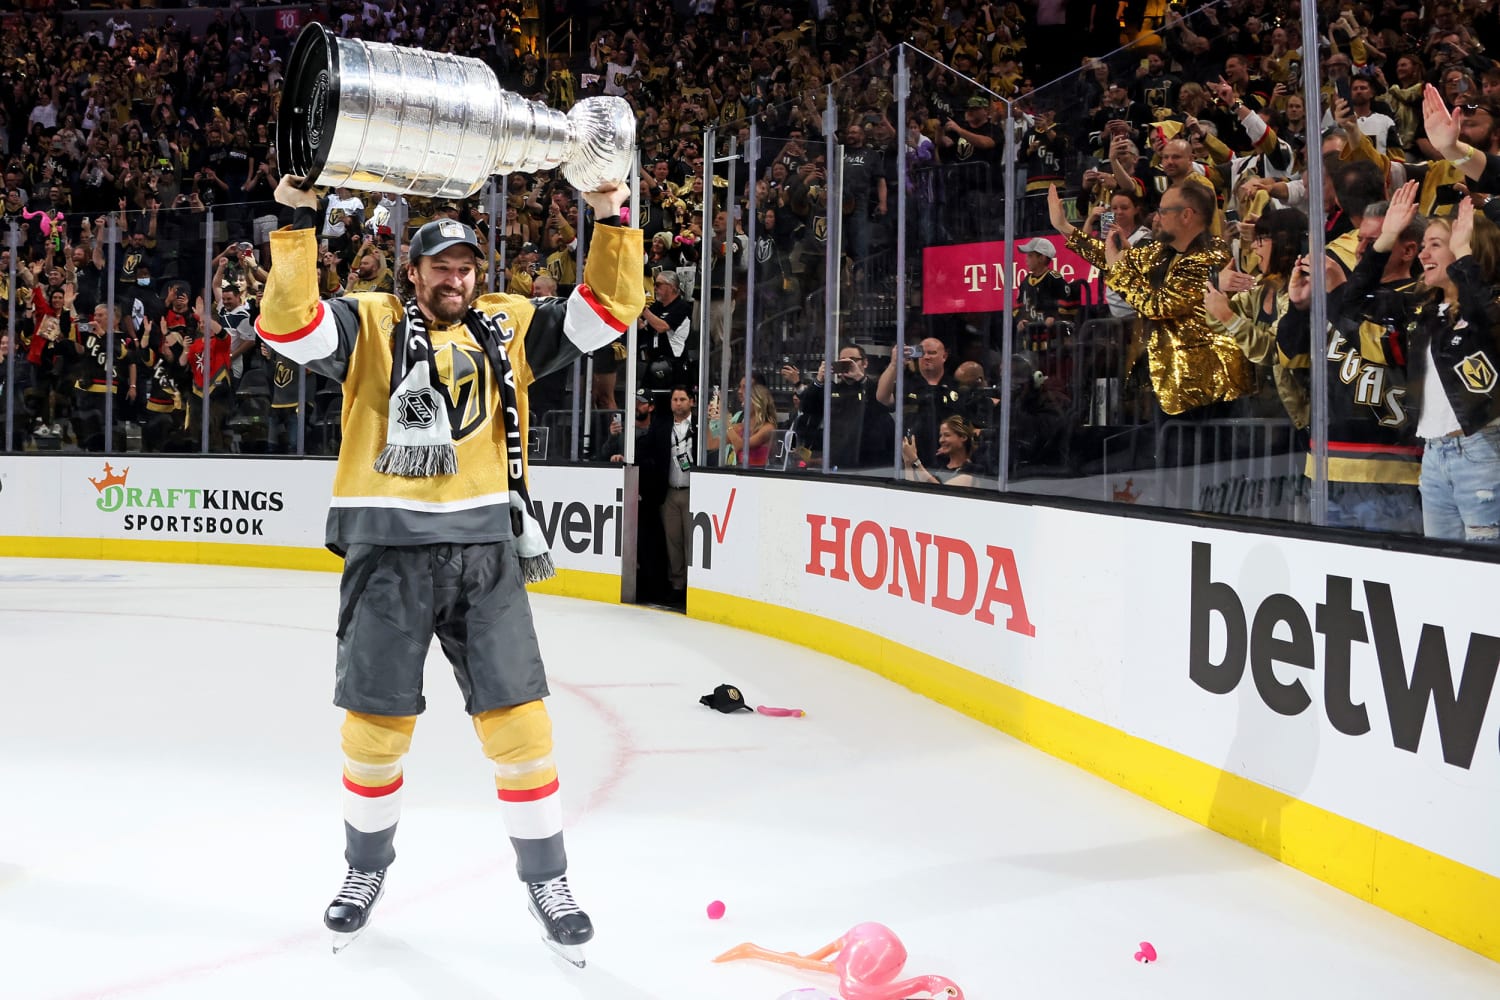 Vegas-Florida Stanley Cup Final shows the value of street hockey in many US  markets - NBC Sports